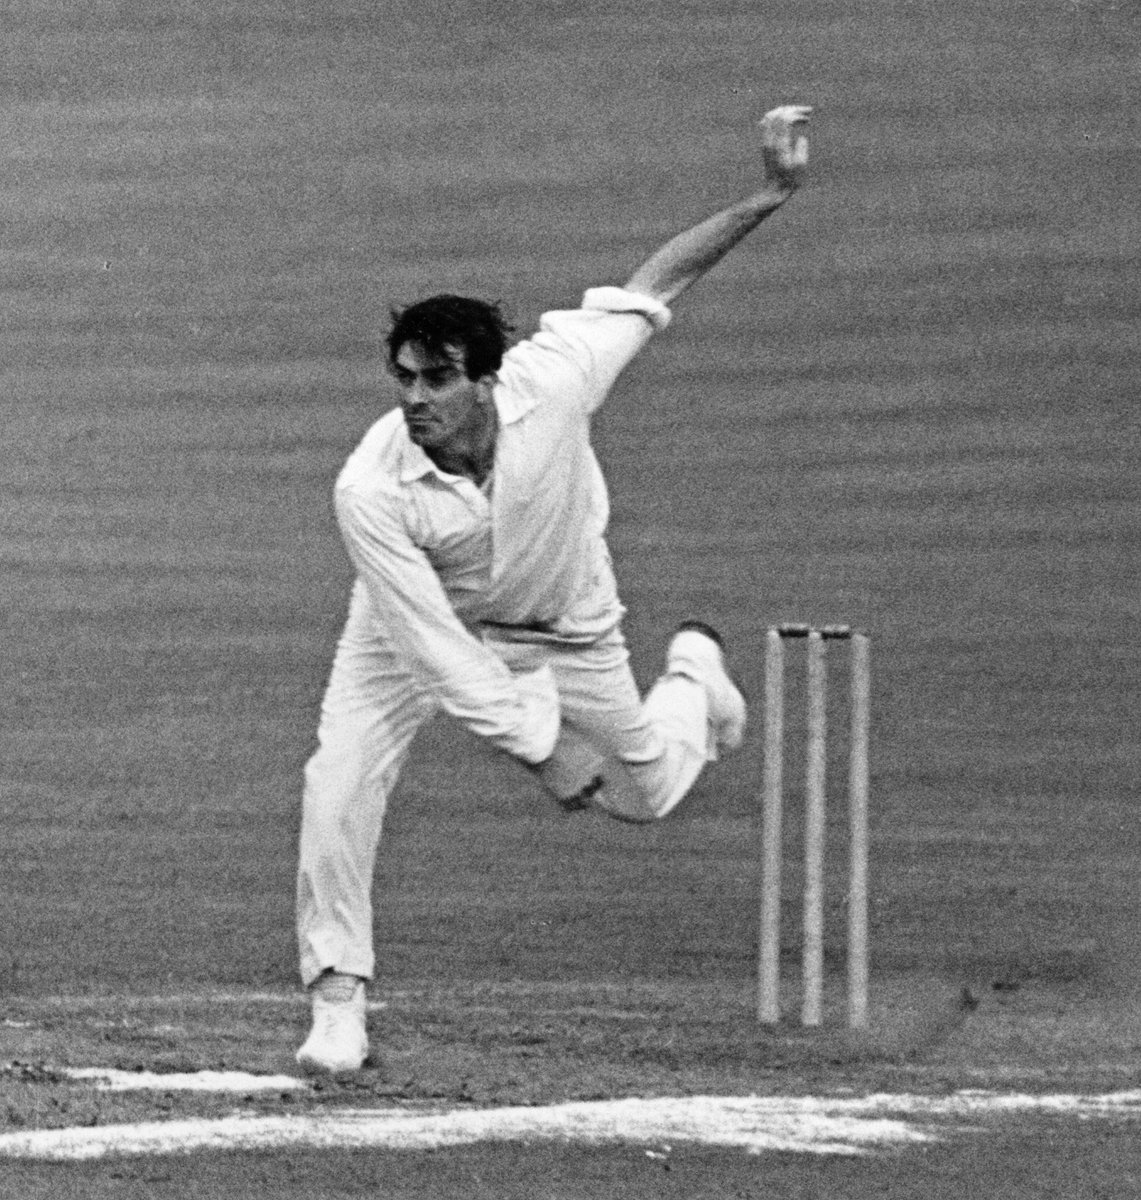 ICC on Twitter: "The greatest fast bowler ever? #OnThisDay in 1931, Fred  Trueman, the first bowler to 300 Test wickets, was born  https://t.co/ZccHWJfwjq" / Twitter